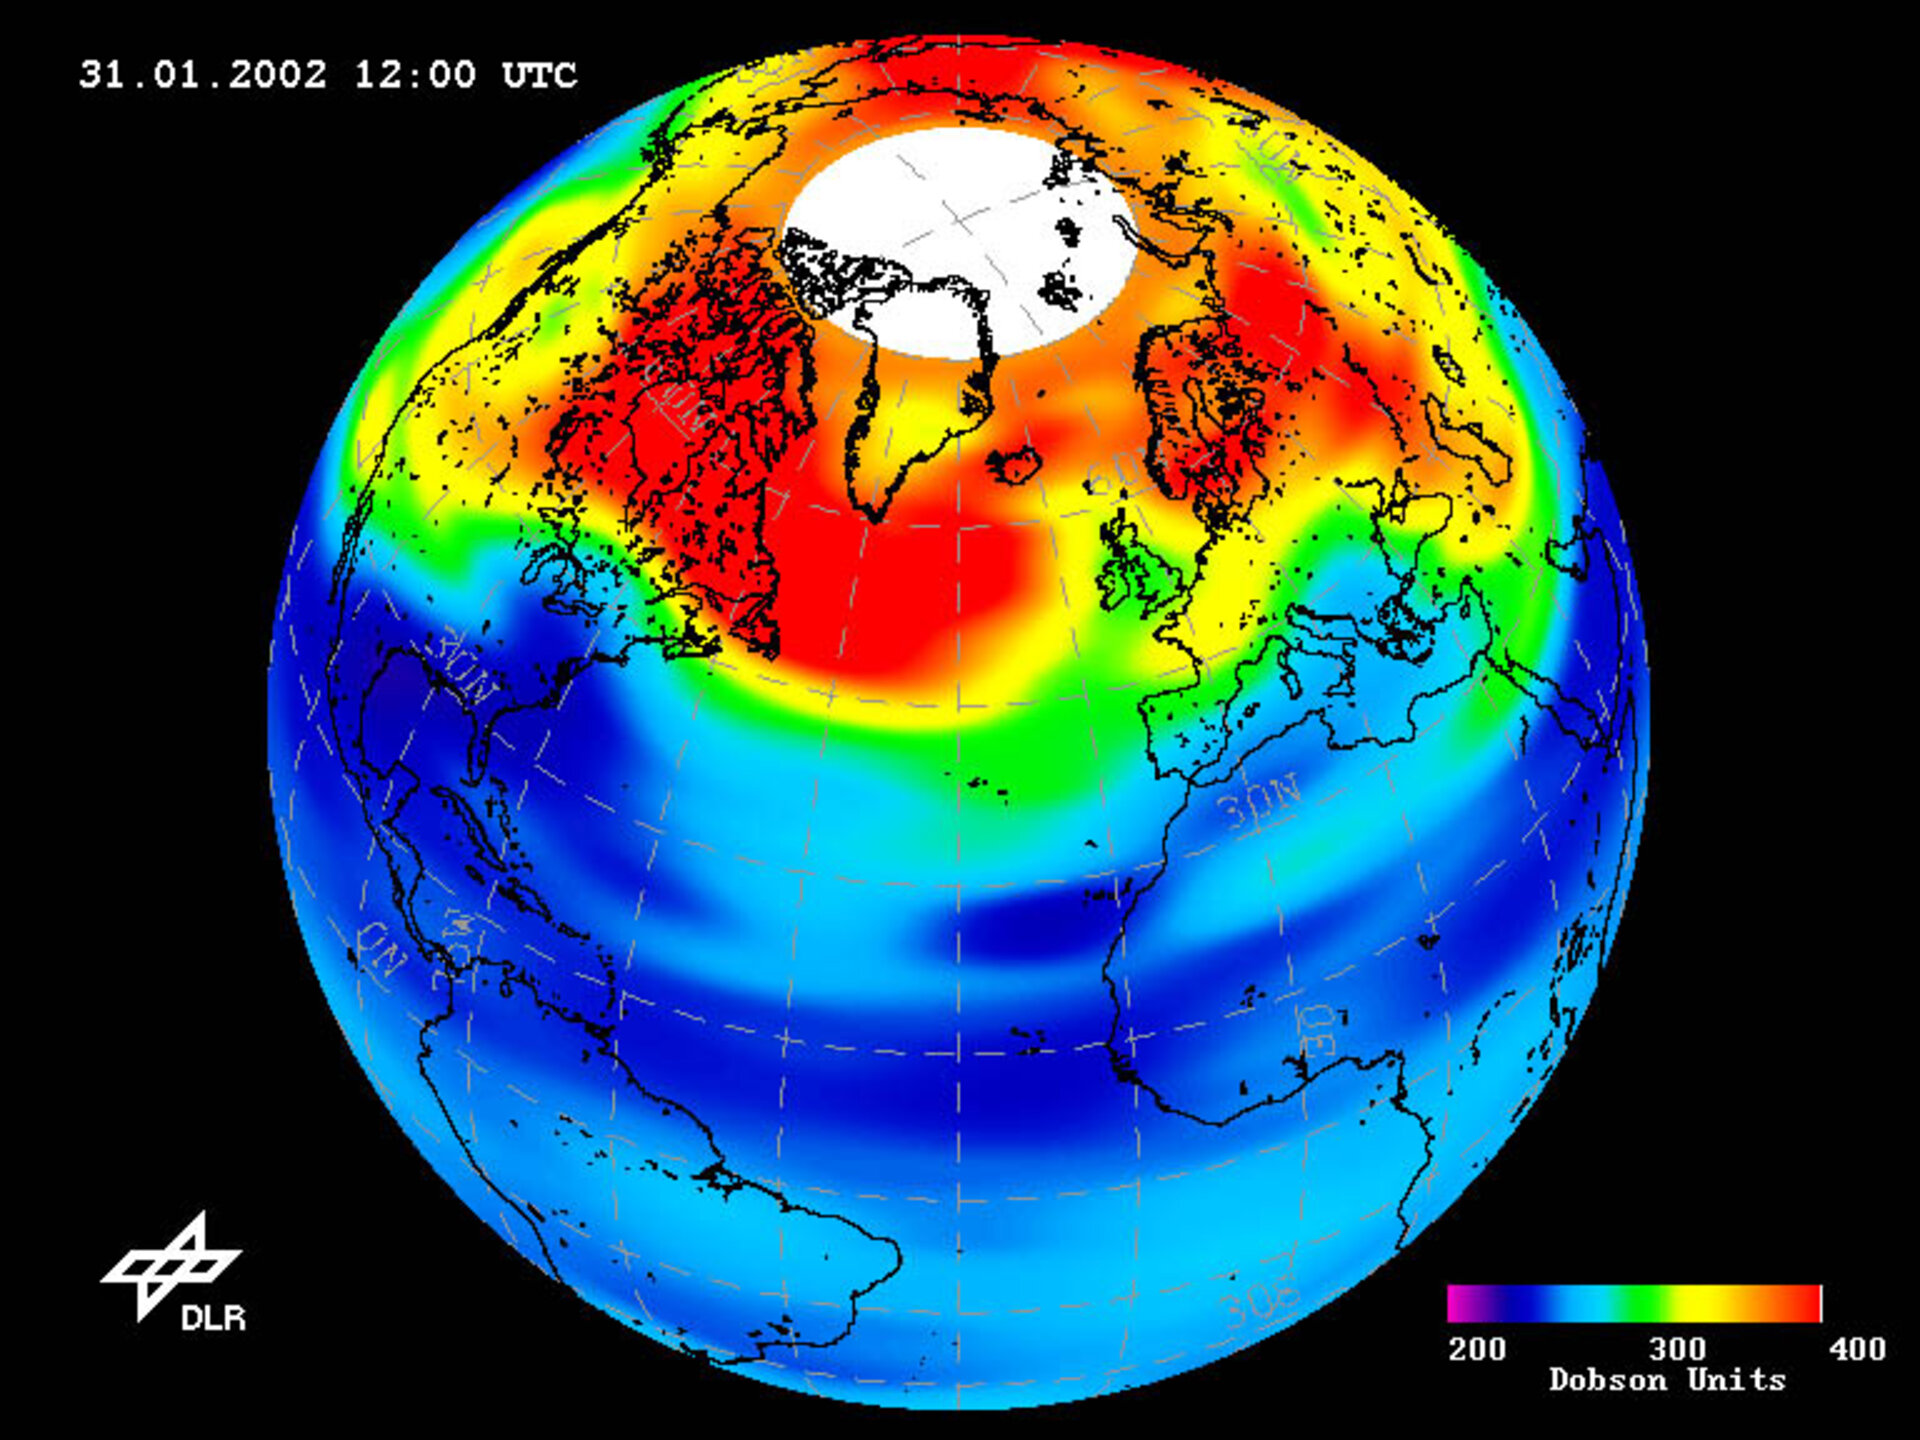 Low-ozone event over Northern Hemisphere on 31 January 2002